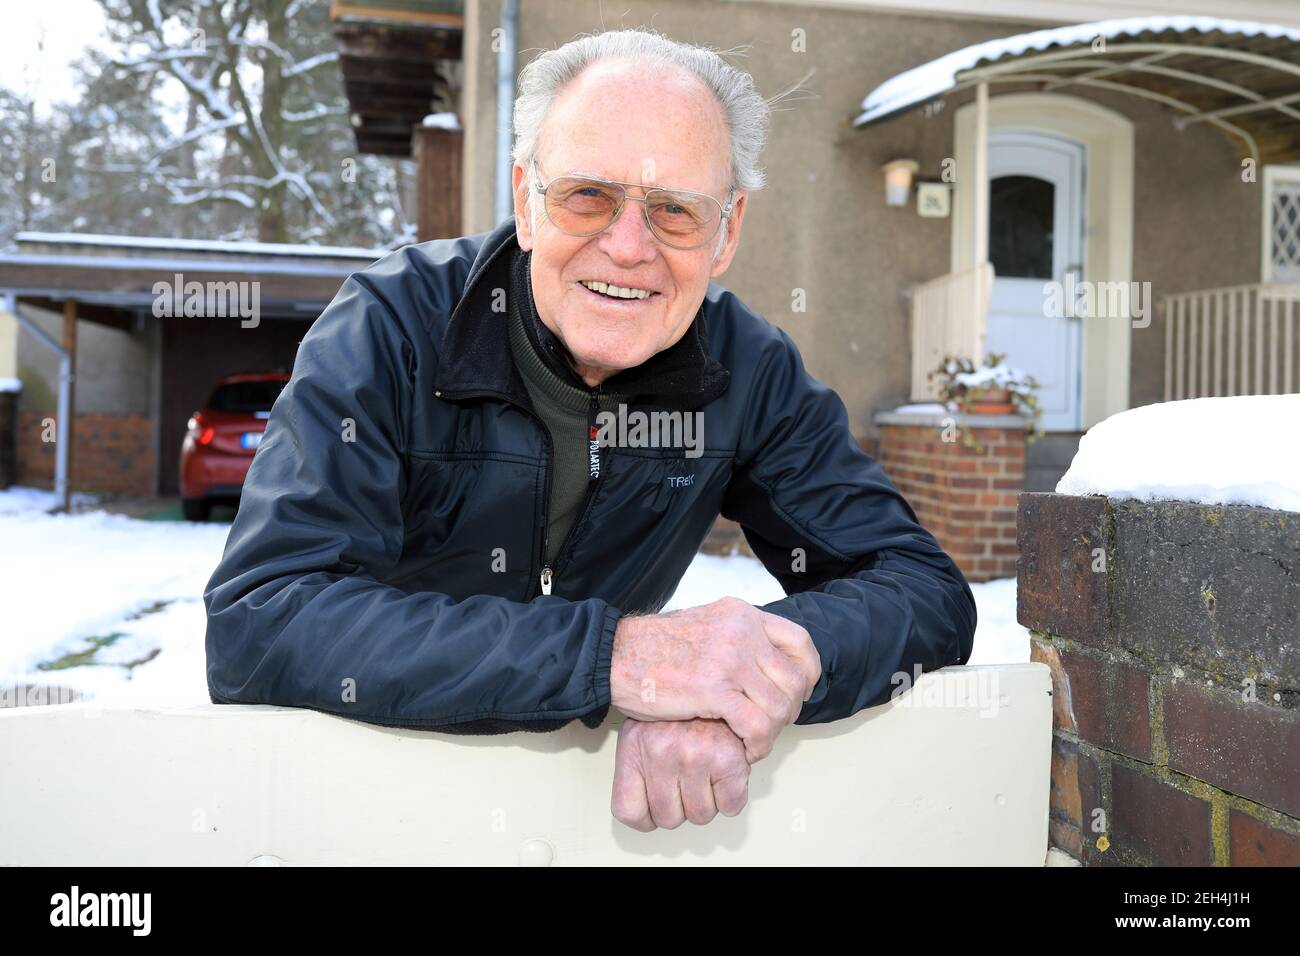 01 February 2021, Saxony-Anhalt, Heyrothsberge: Cycling legend Gustav-Adolf Schur stands in front of his house in Heyrothsberge. Schur will be 90 years old on 23.02.2021. In his active time, 'Täve' triggered true storms of enthusiasm. Millions of people lined the streets when the nine-time GDR Sportsman of the Year and his team colleagues roared past on their racing bikes. Between 1950 and 1964, he celebrated successes that were unique in amateur sport. In 1955, the Heyrothsberg native became the first German rider to win the prestigious Peace Tour. Photo: Peter Gercke/dpa-Zentralbild/ZB Stock Photo